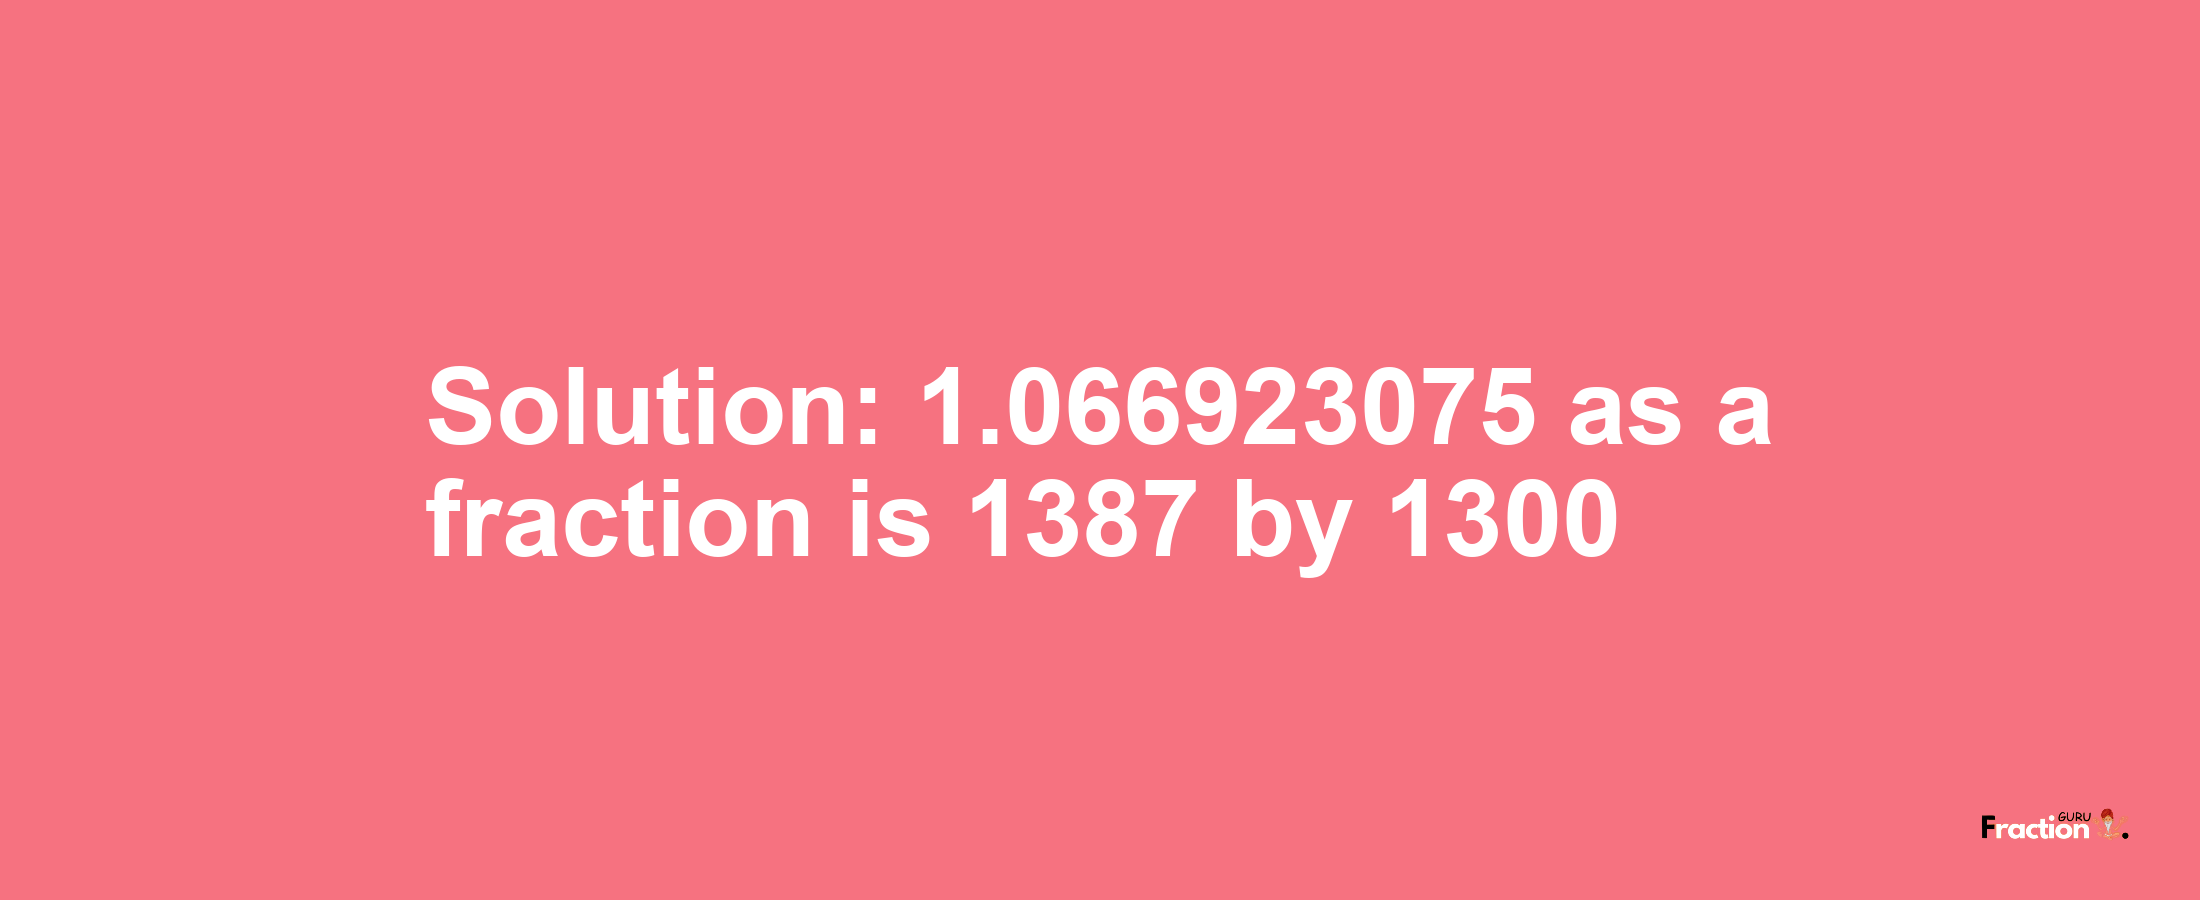 Solution:1.066923075 as a fraction is 1387/1300